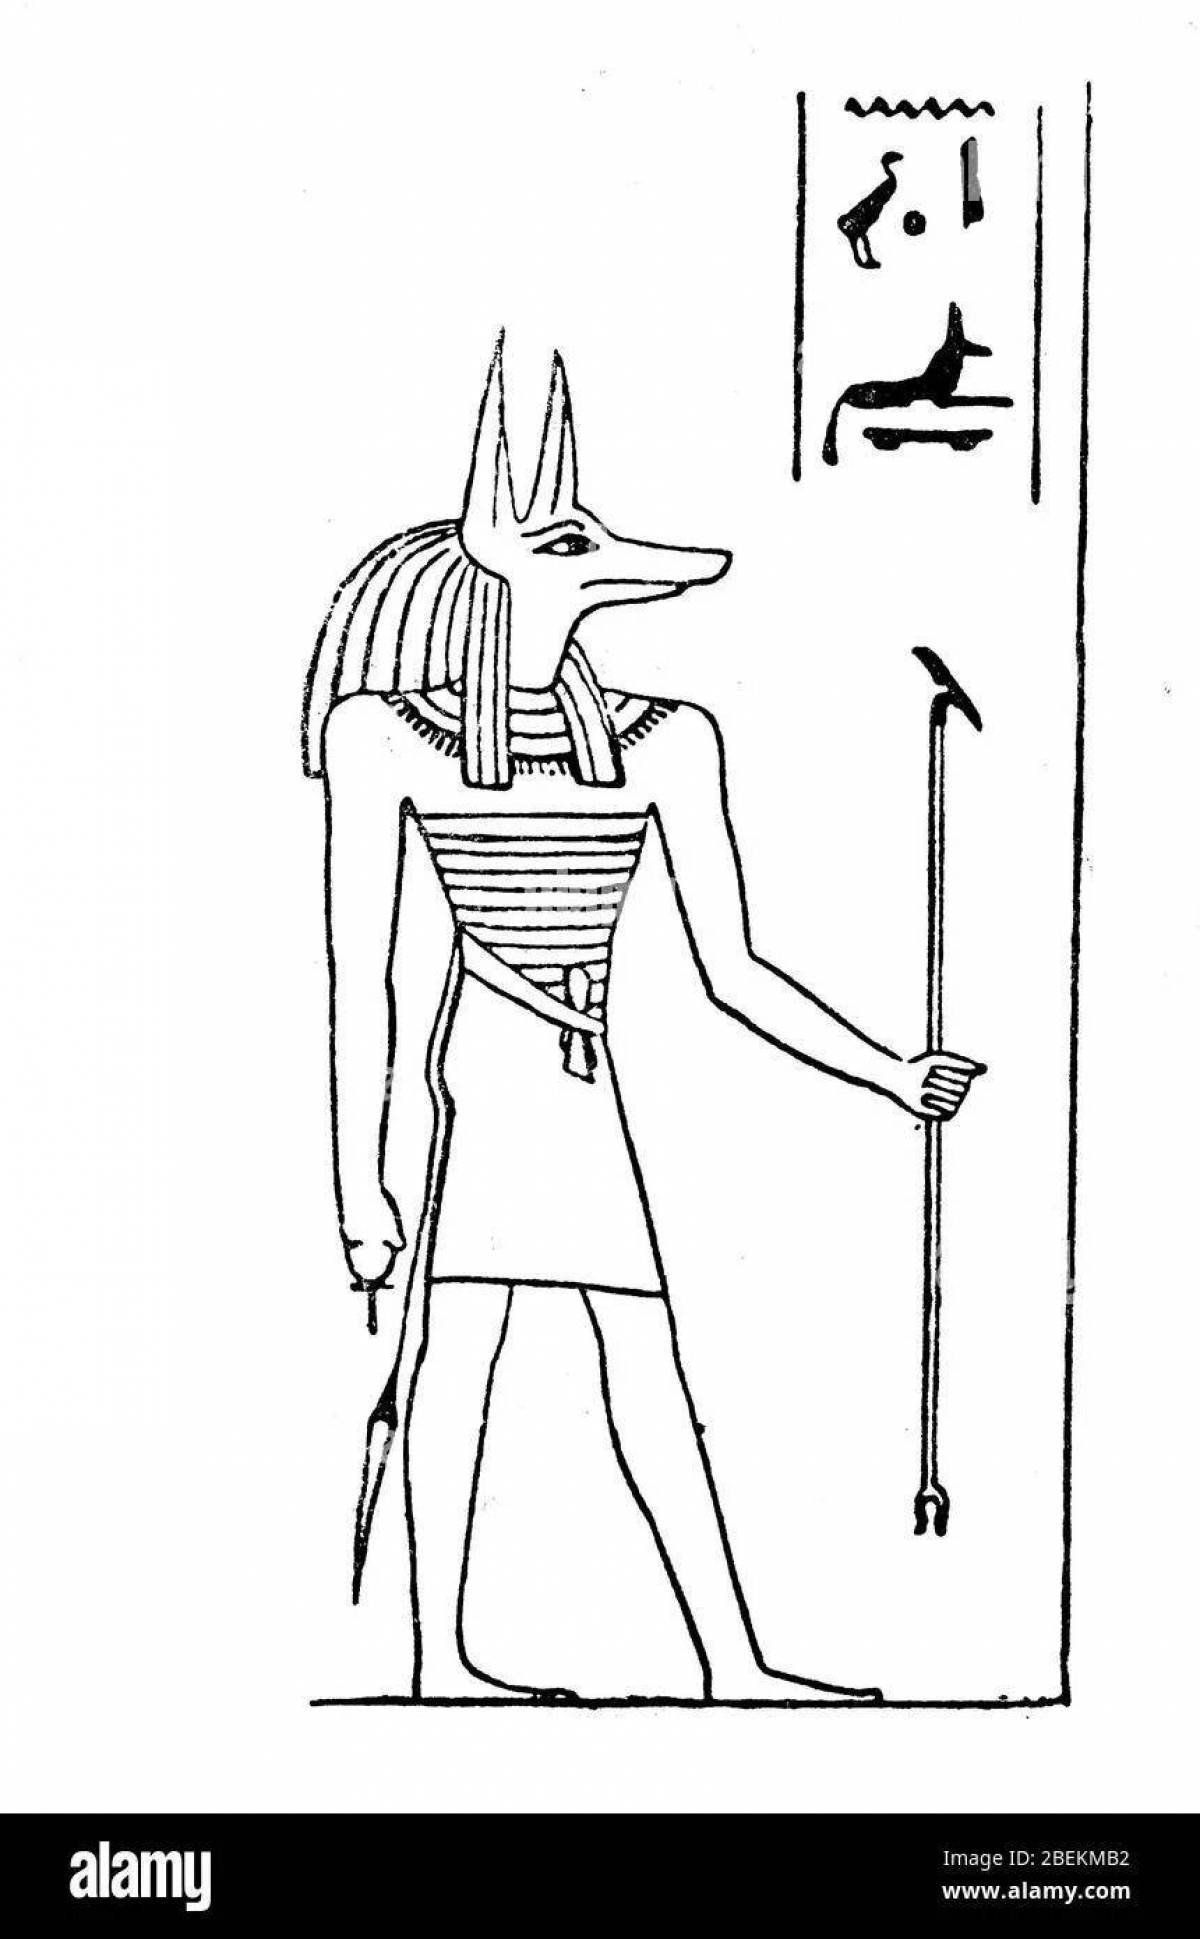 Generous coloring anubis god of ancient egypt